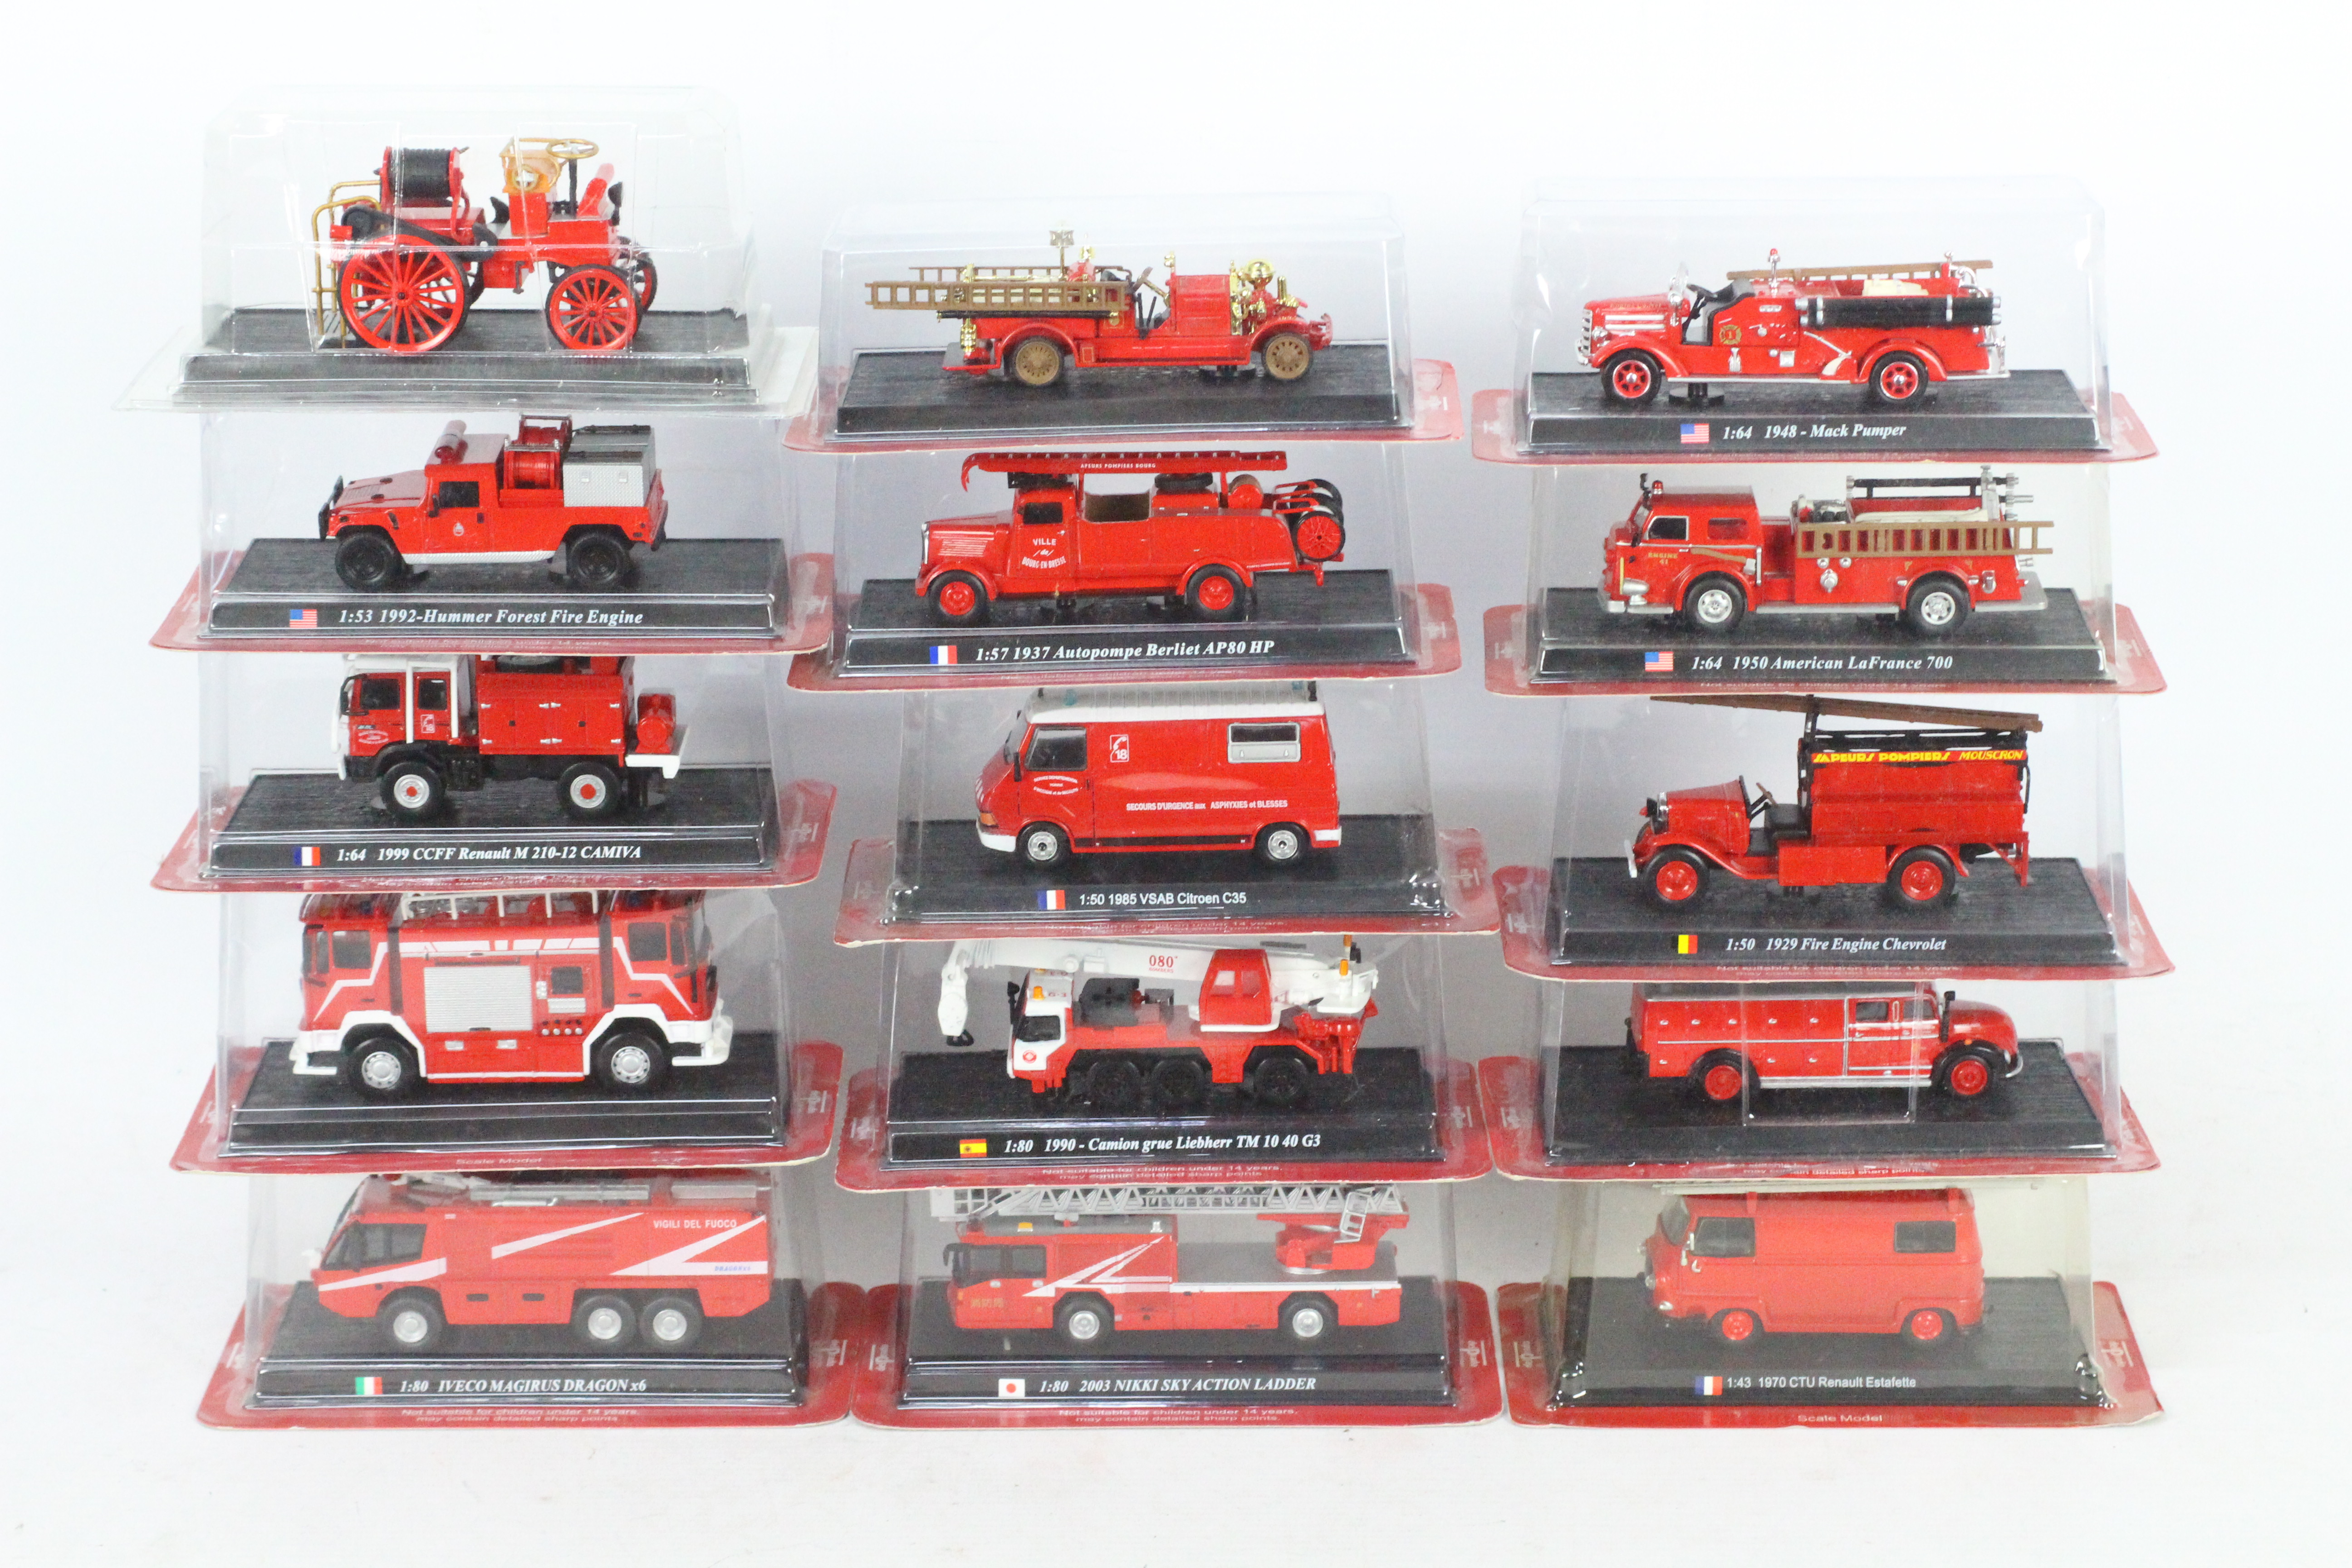 Del Prado - A group of 15 bubble packed Del Prado Fire Brigade models and appliances in various